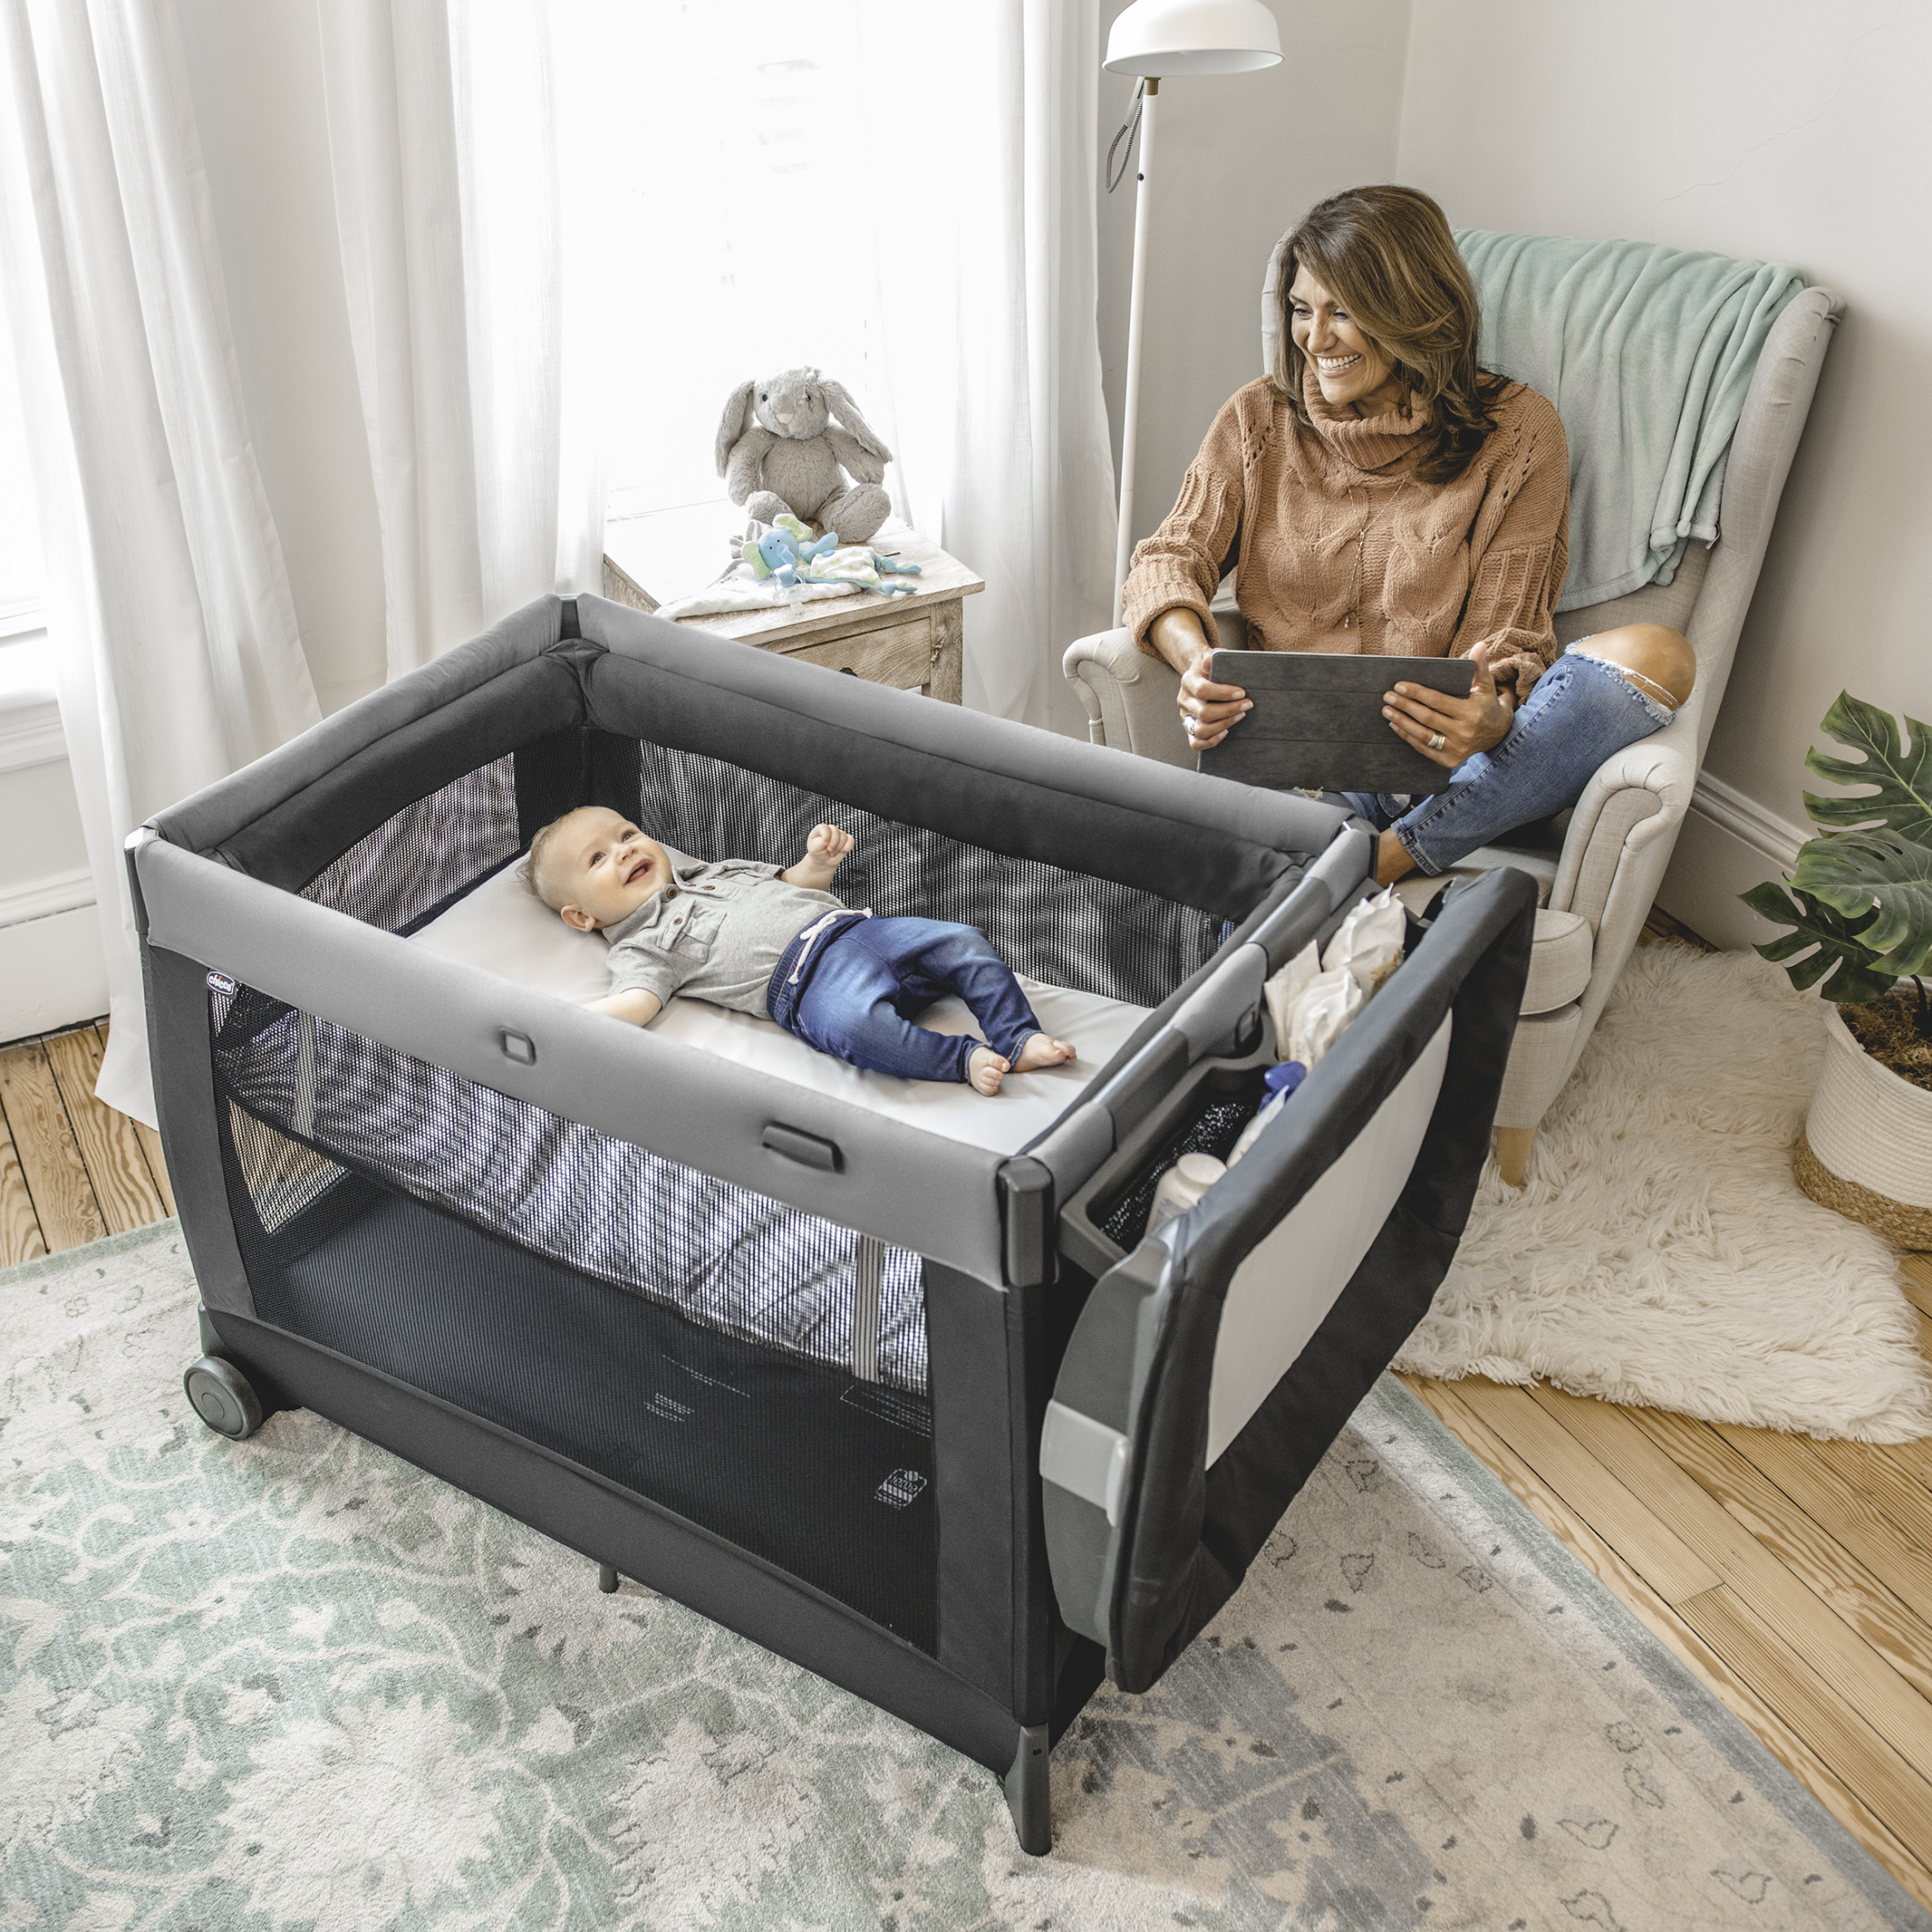 Chicco Lullaby All-in-One Portable Playard with Bassinet and Snap-on Changer - Camden (Black) - image 3 of 10